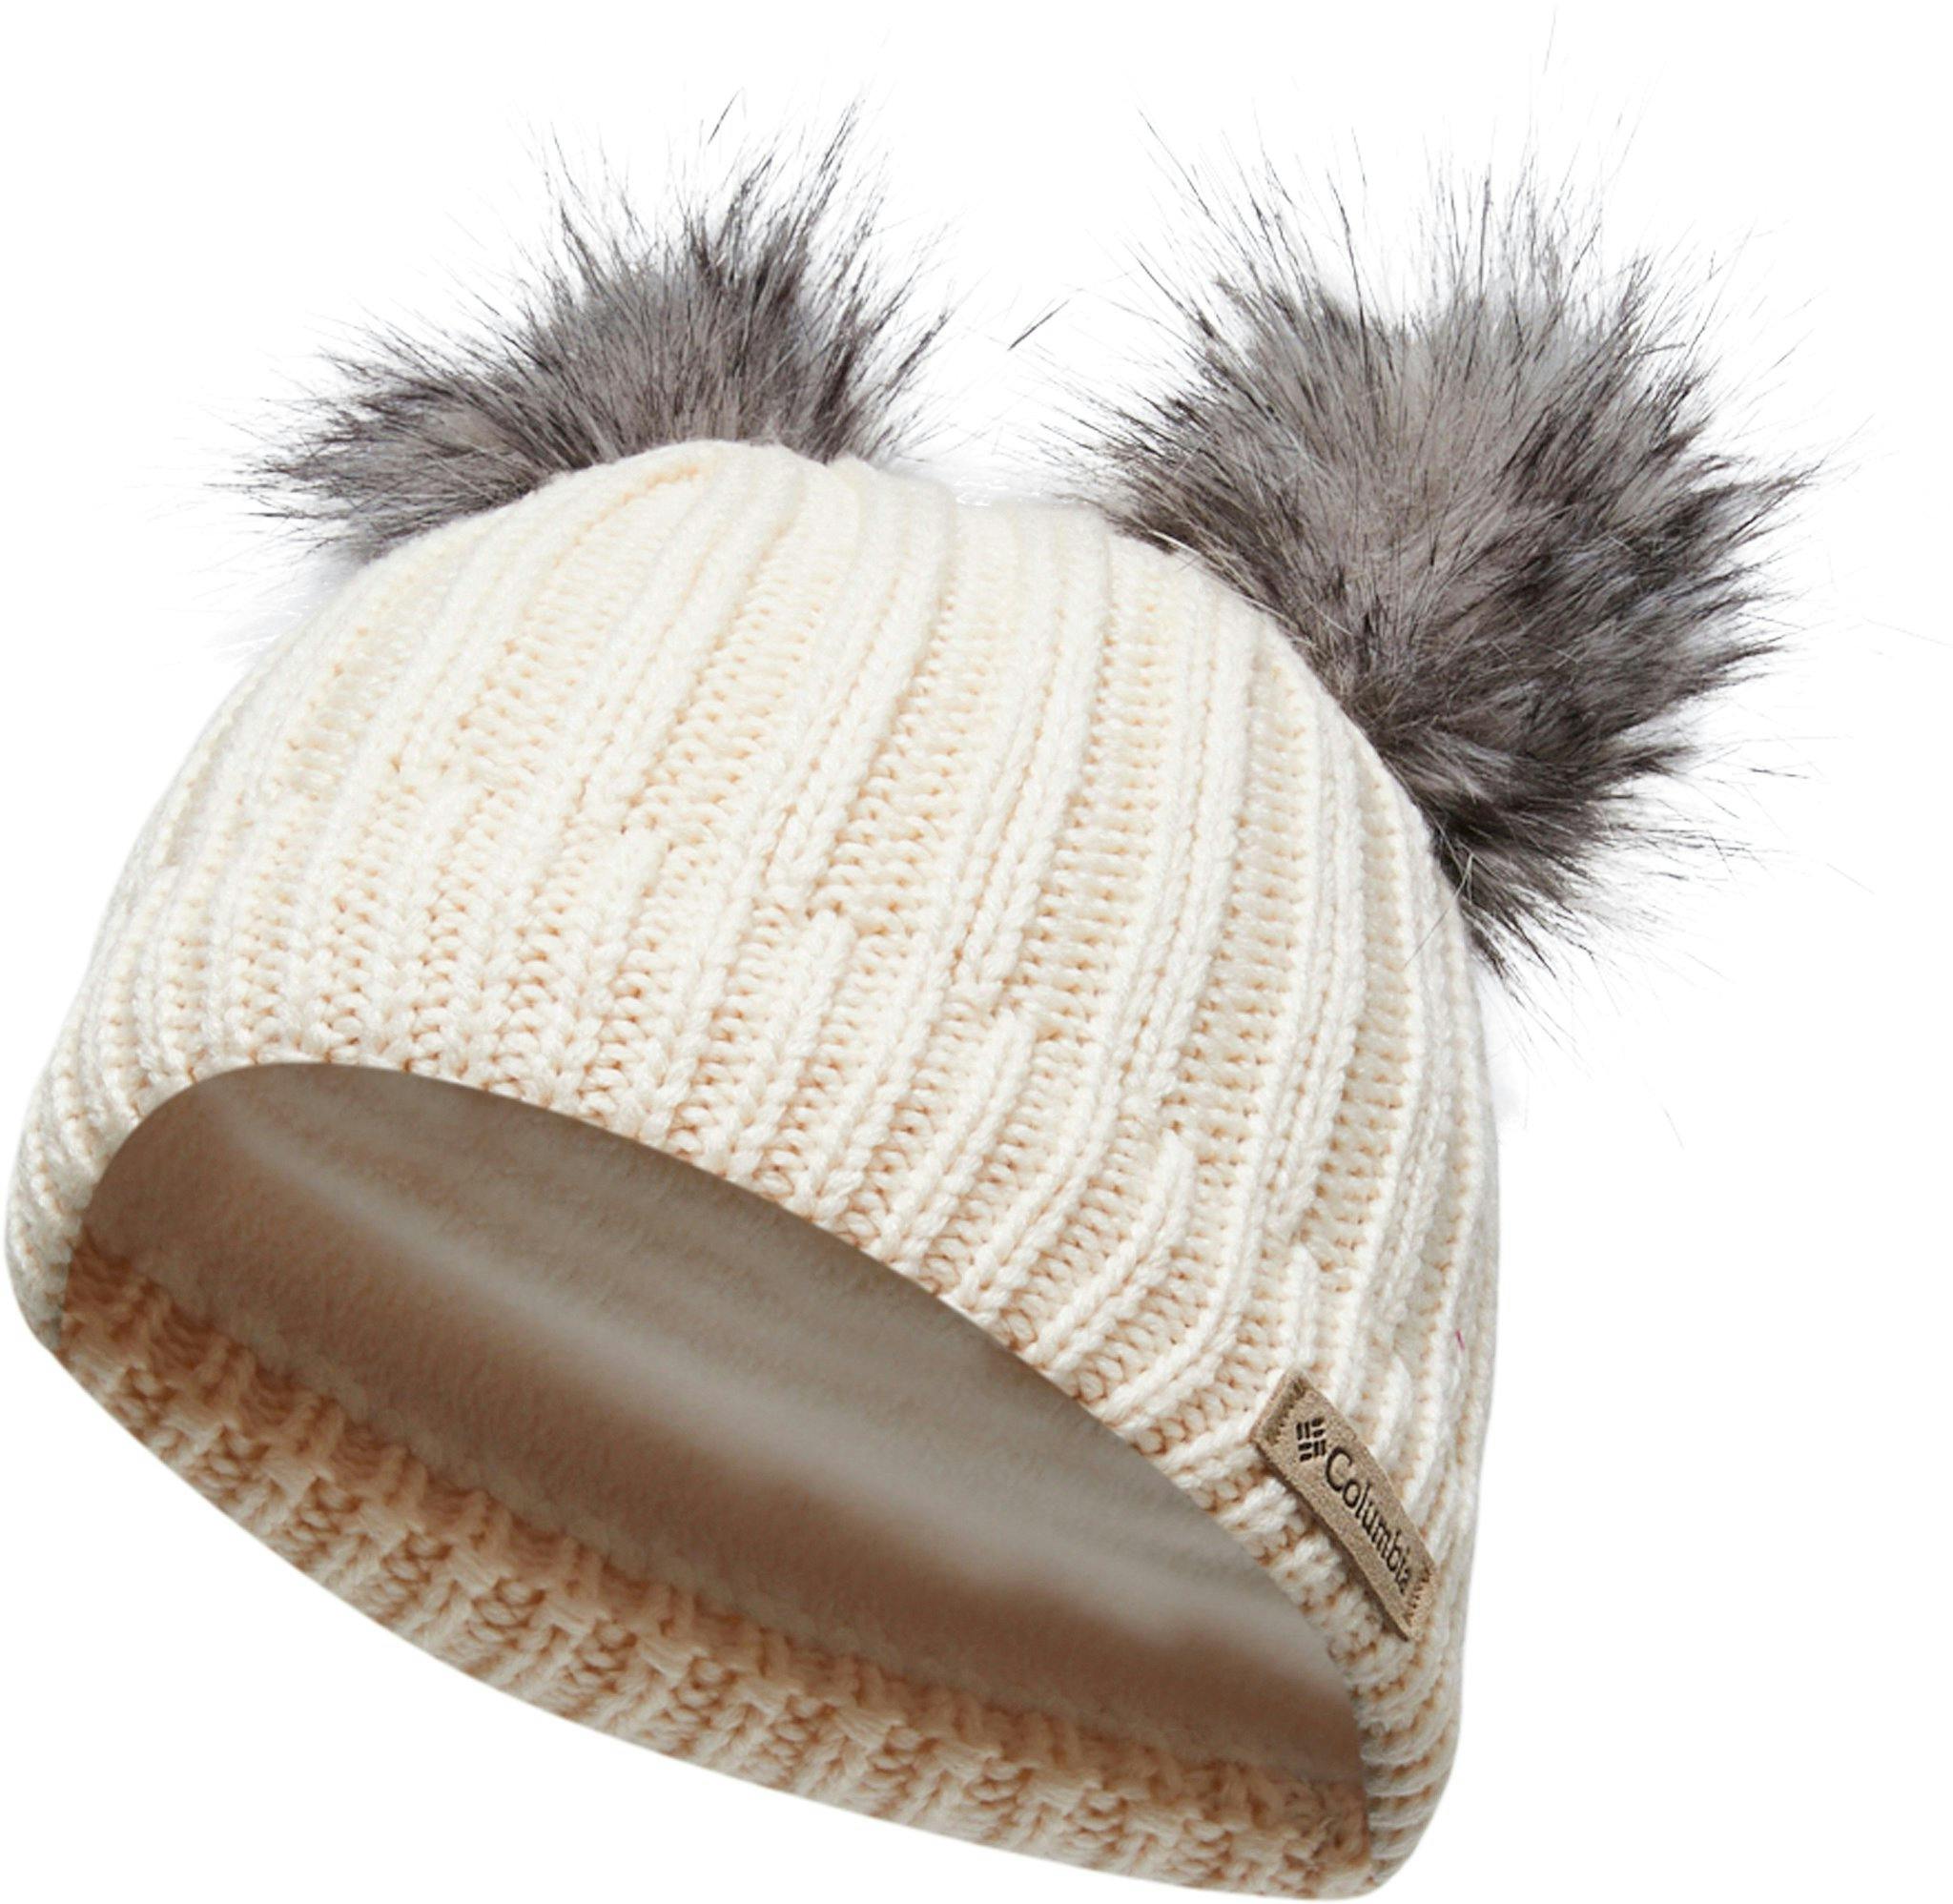 Product image for Snow Problem II Beanie - Youth